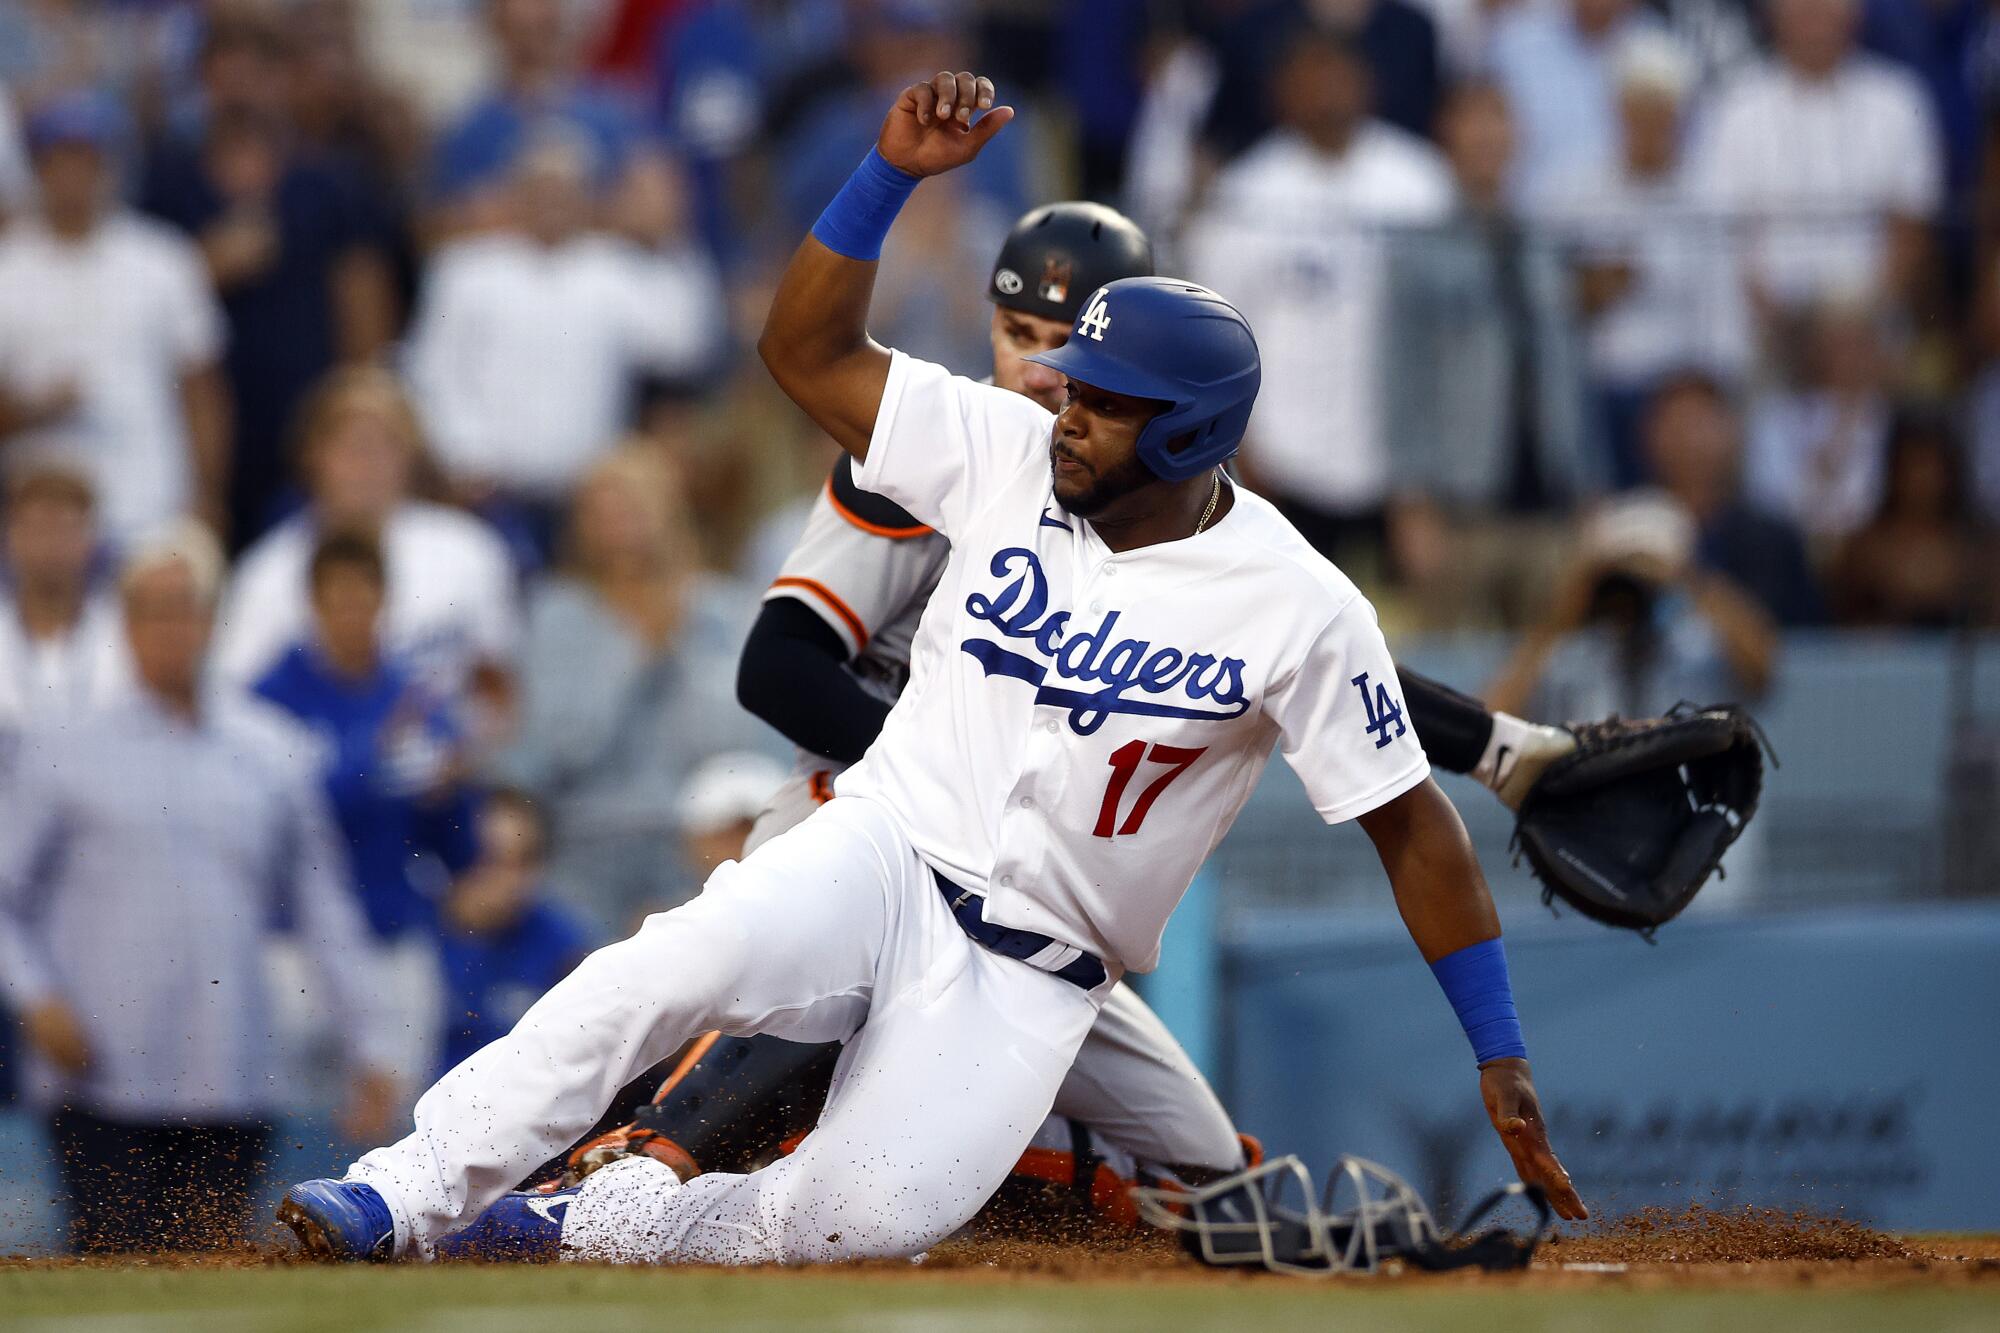 Dodgers vs. Giants: Live updates, start time, score and analysis